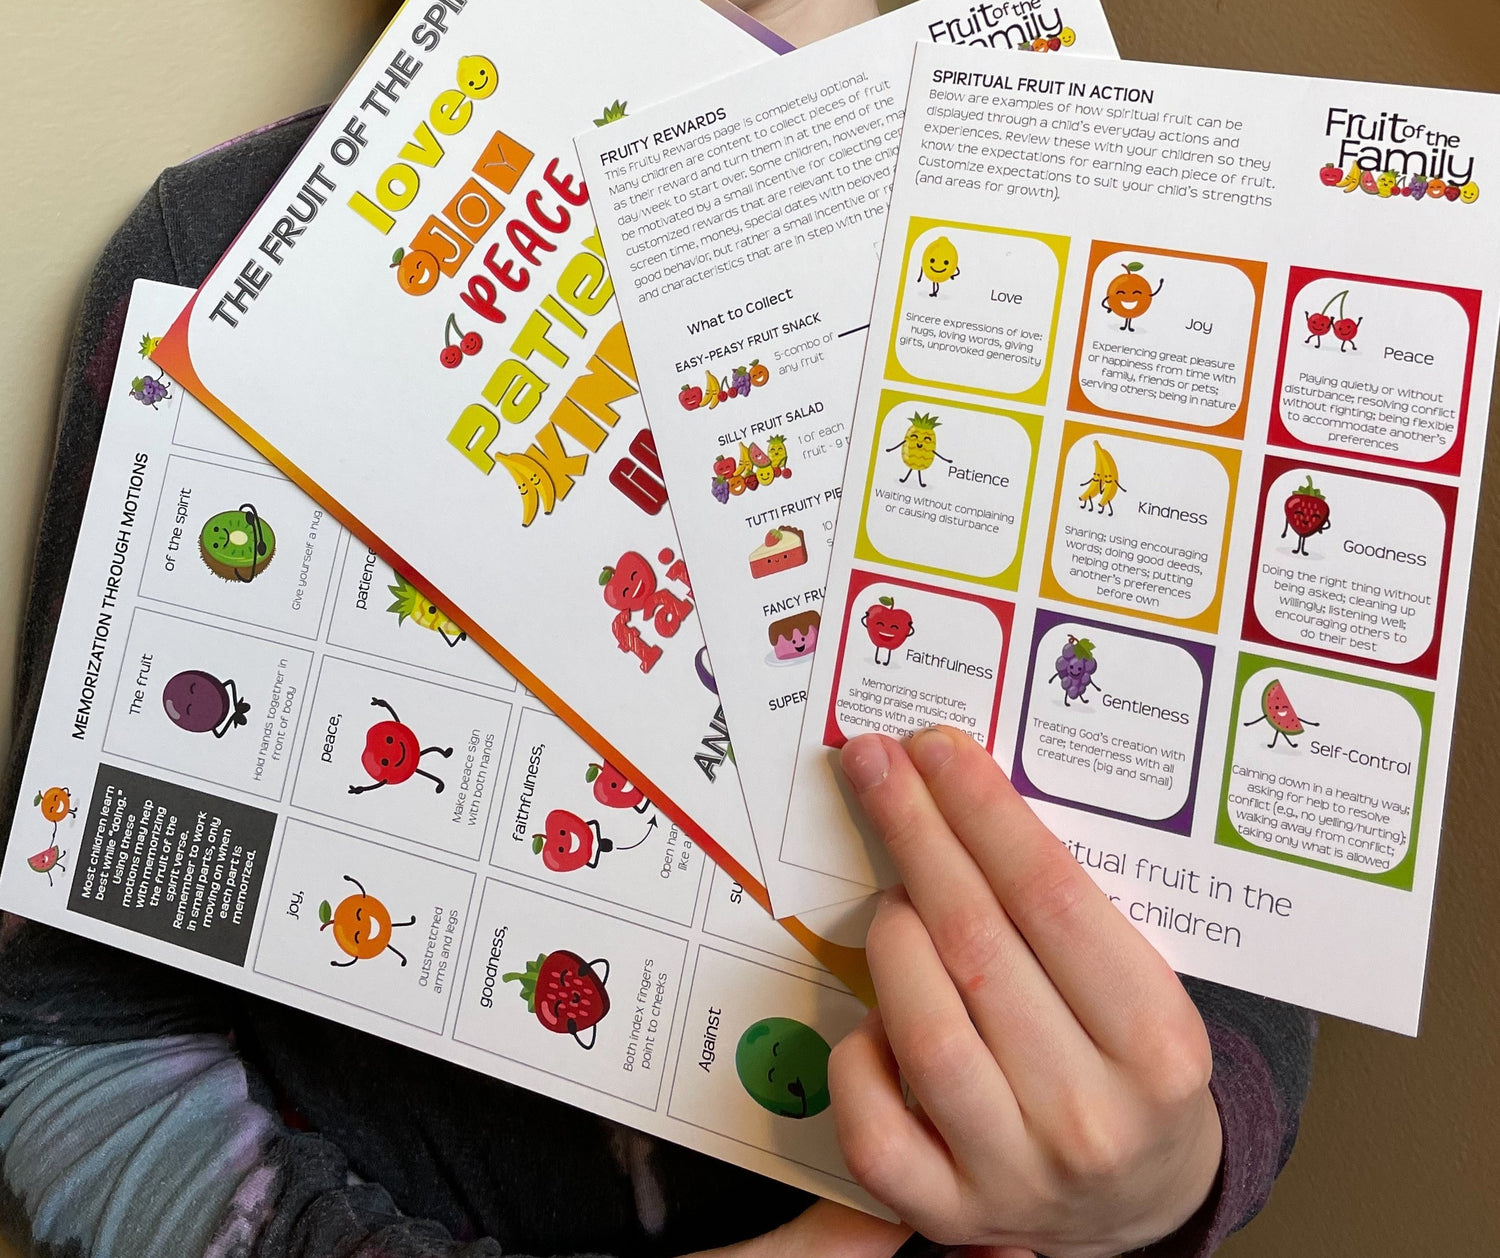 Close up of a hand holding 4 cards that are part of the game. Card one shows smiling fruit doing motions for a bible verse. Card two shows colorful fruit of the spirit bible verse. Card 3 is titled Fruity Rewards and card 4 is titled Spiritual Fruit in Action and has 9 boxes-each with a piece of fruit describing one of the fruits of the spirit. 